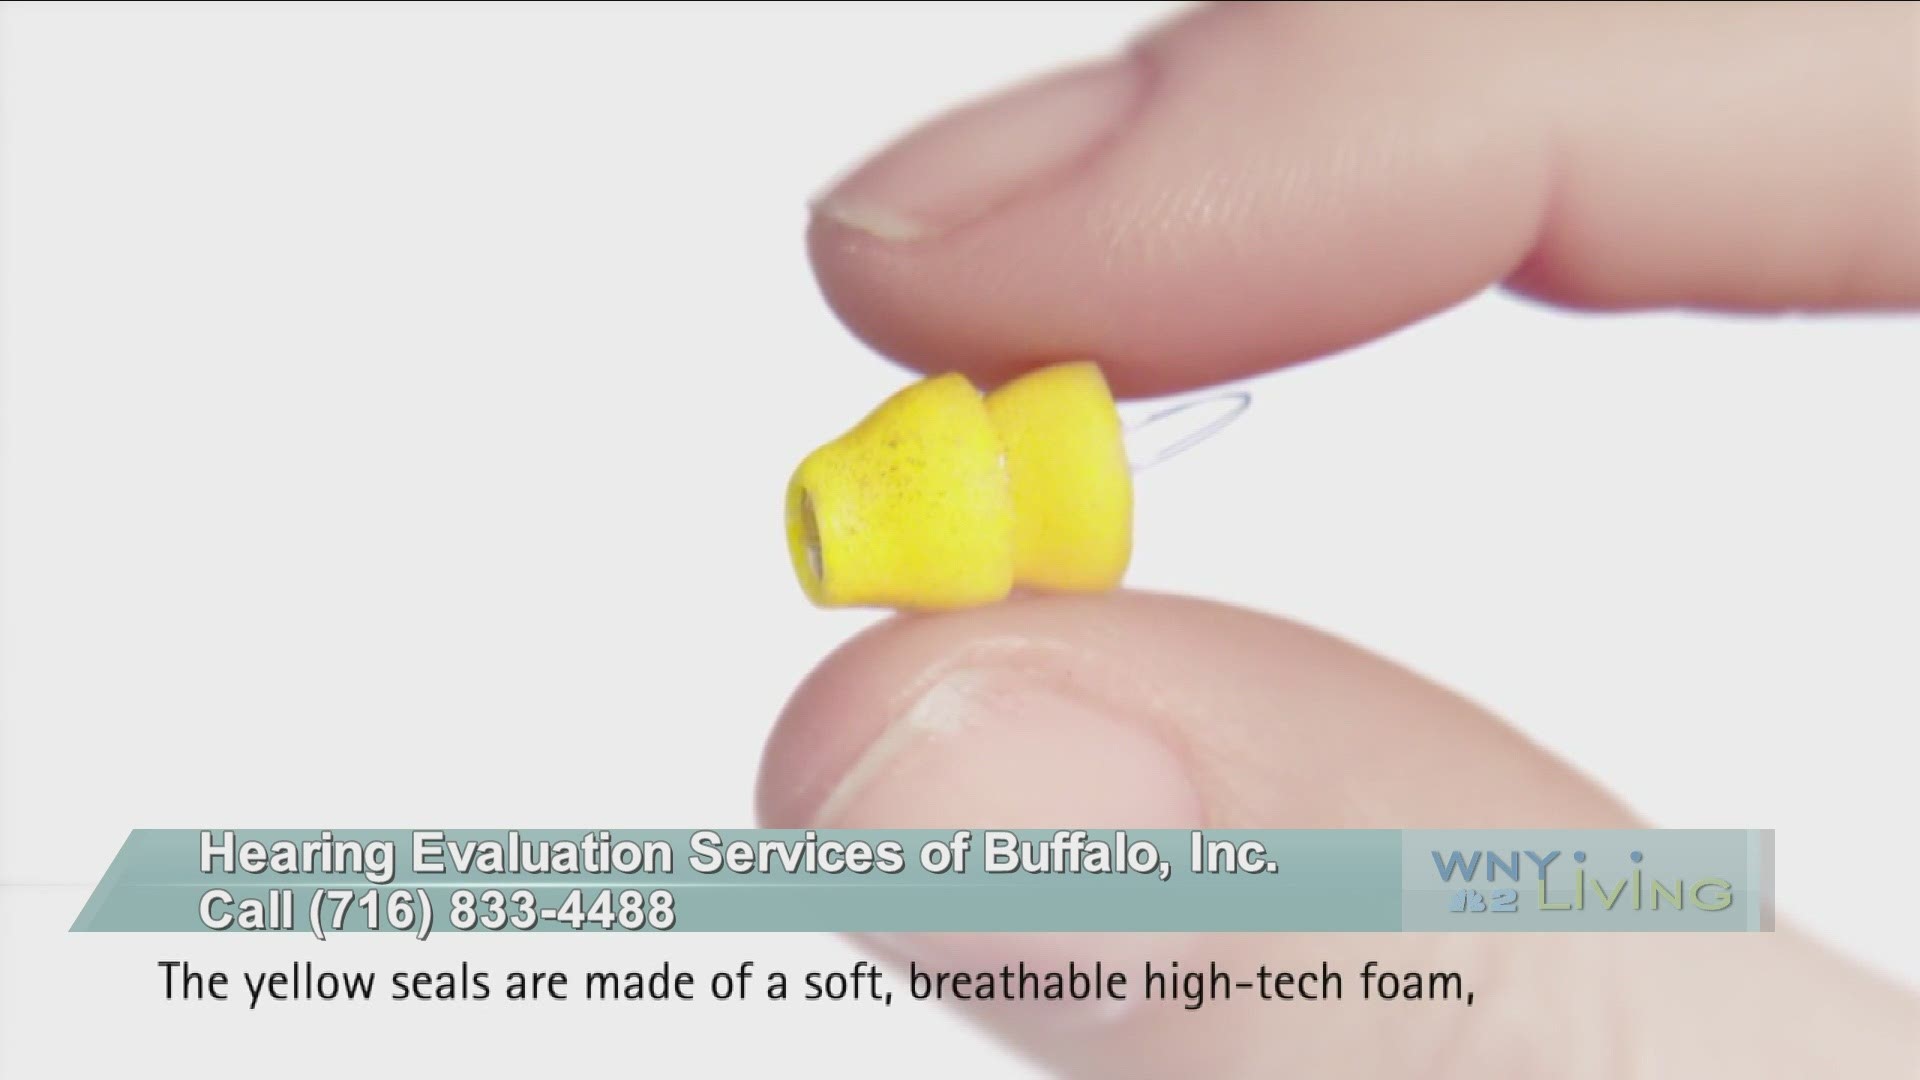 WNY Living - March 6 - Hearing Evaluation Services of Buffalo (THIS VIDEO IS SPONSORED BY HEARING EVALUATION SERVICES OF BUFFALO)